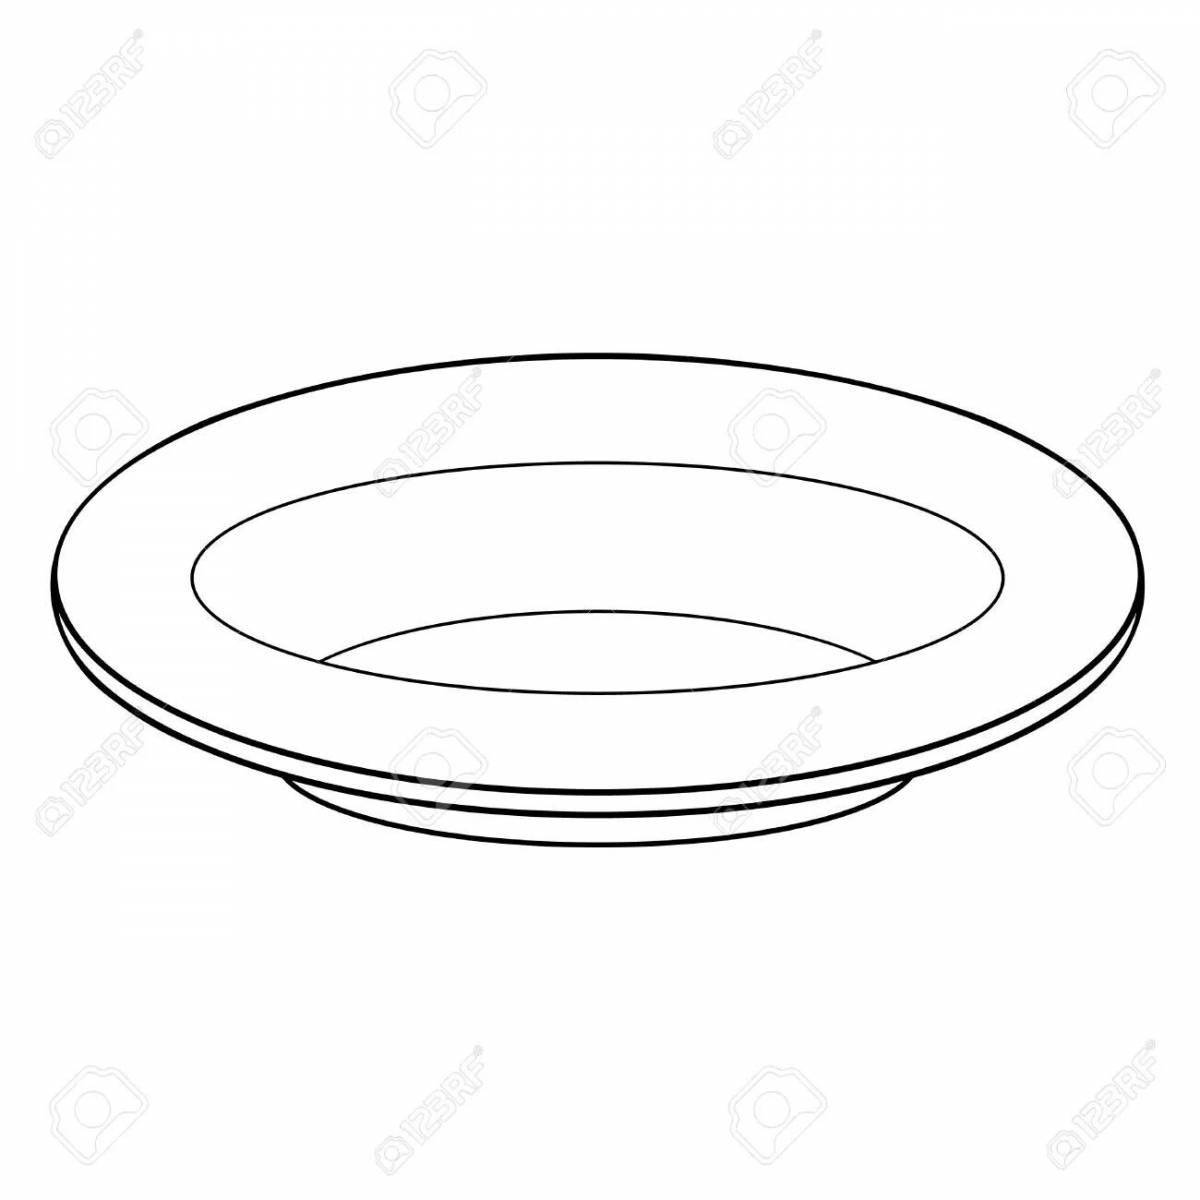 Outstanding saucer coloring page for the little ones